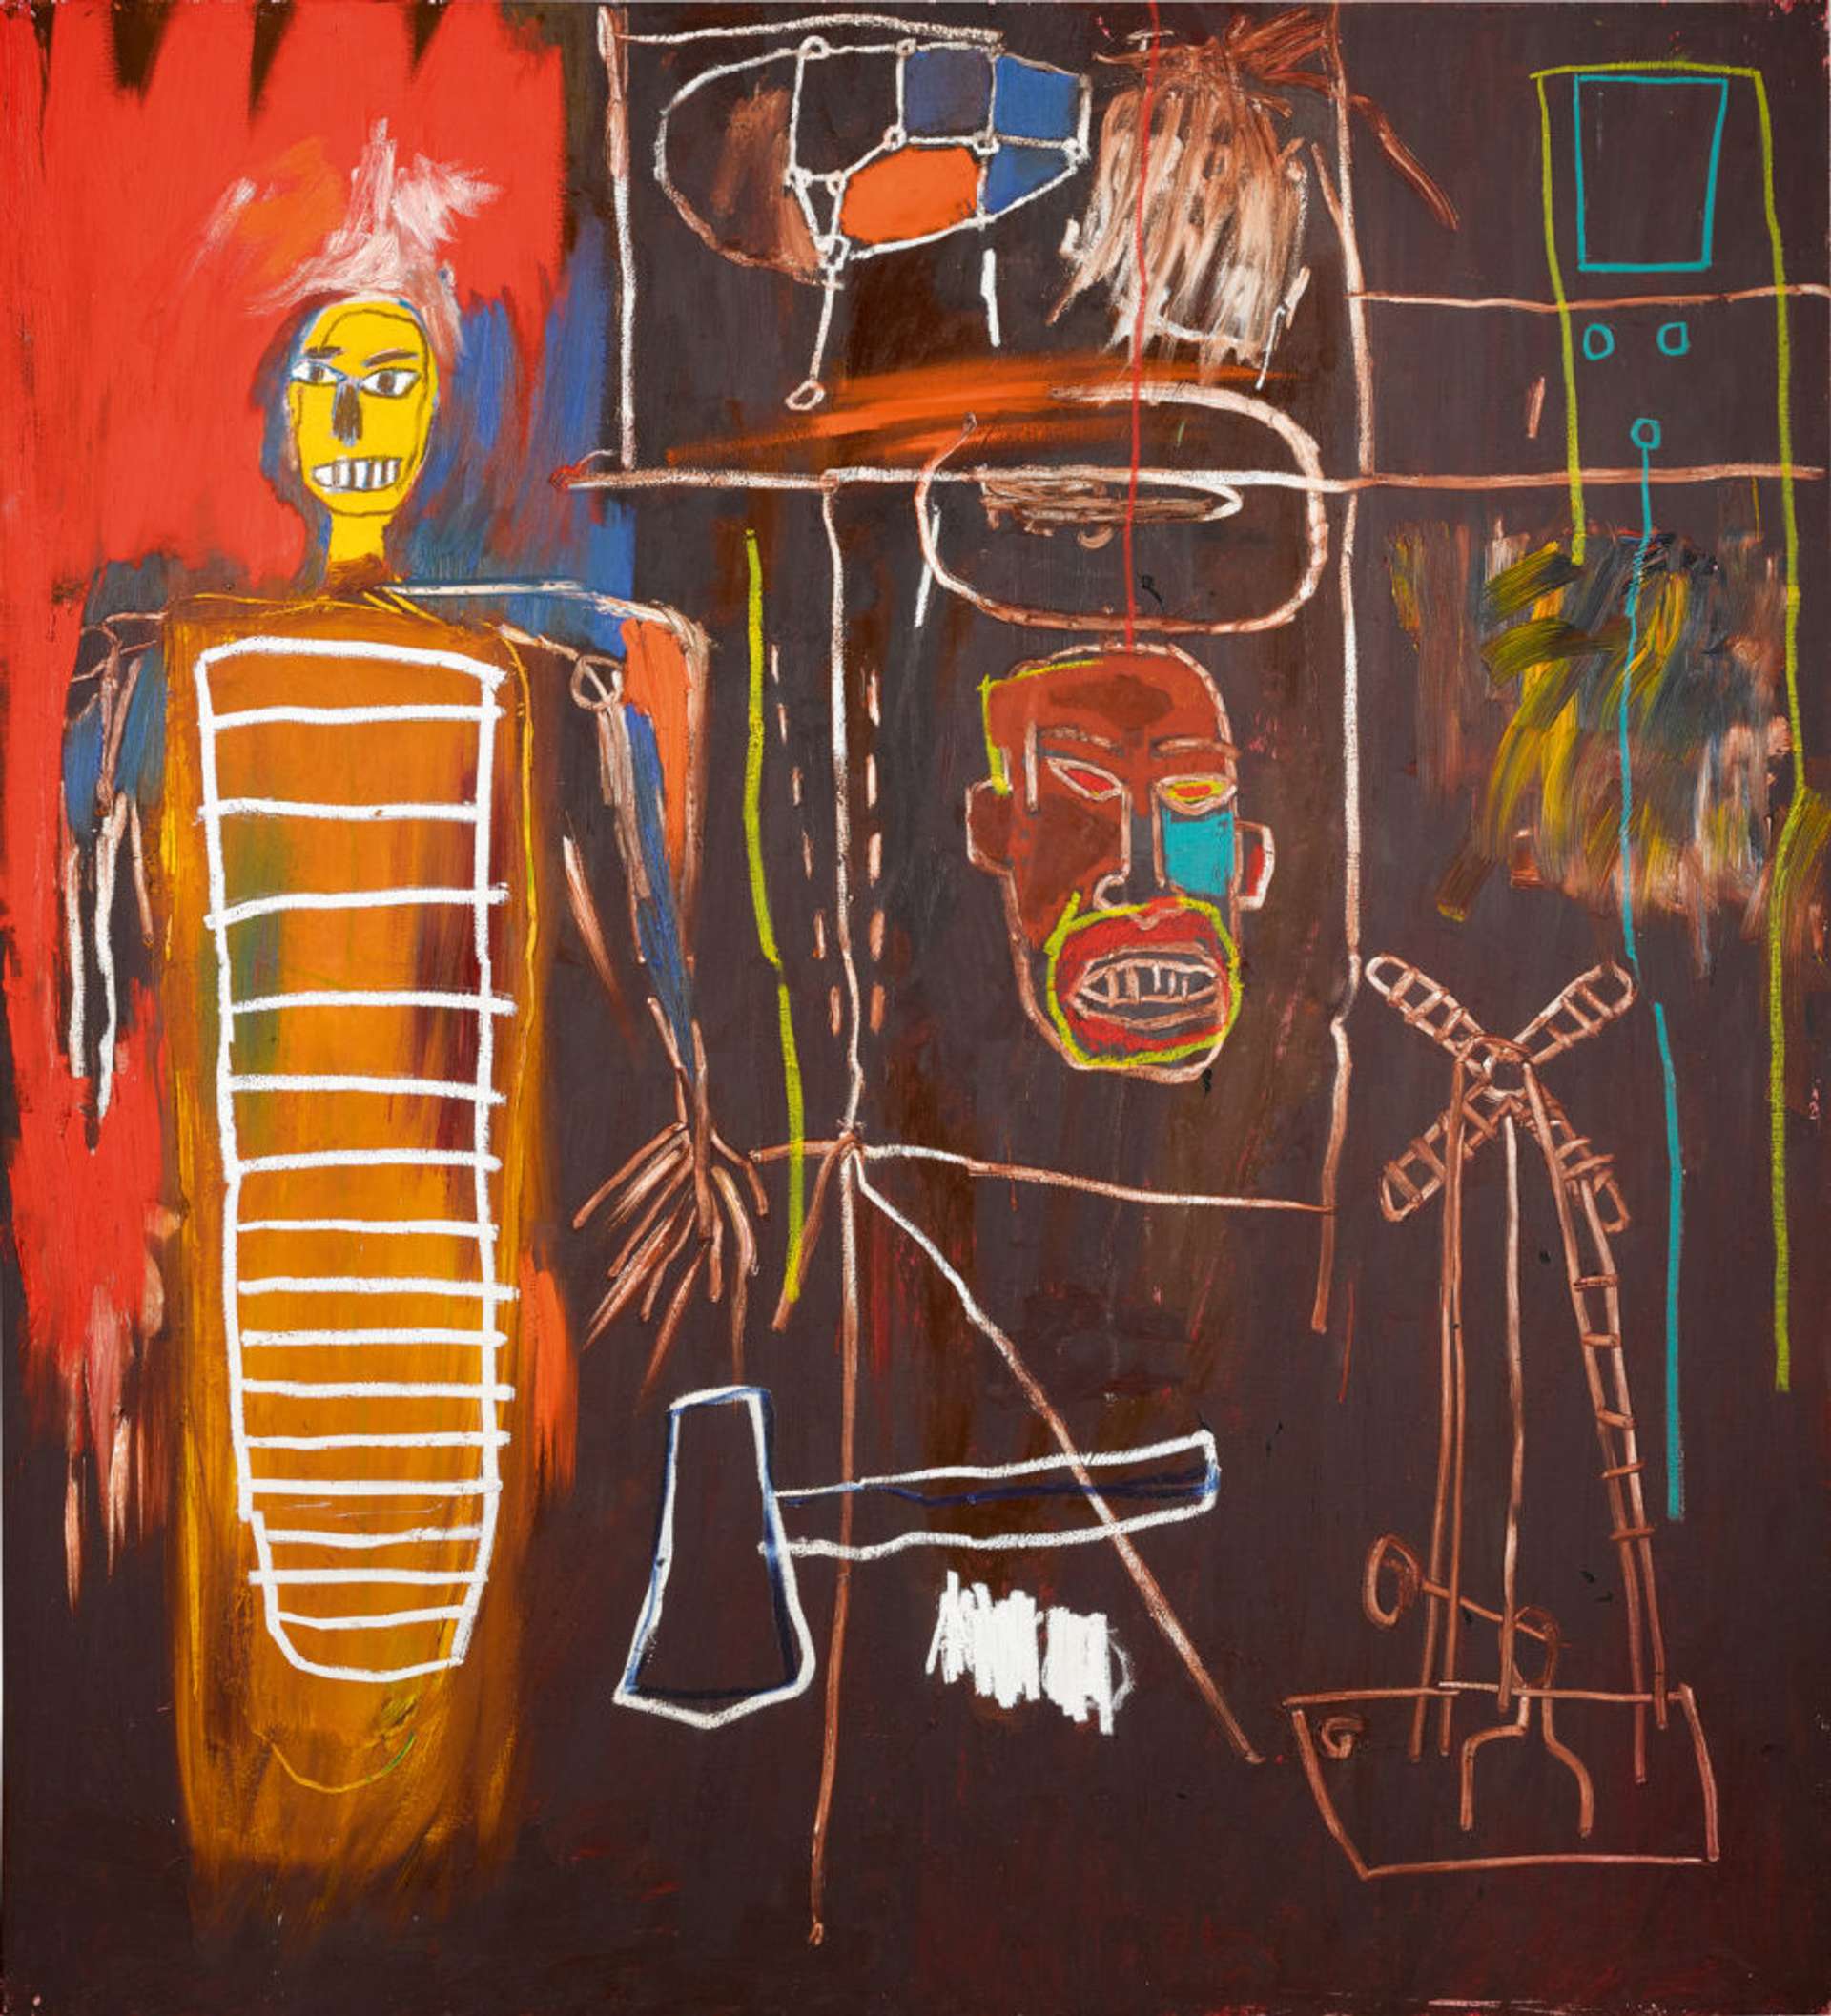 Jean-Michele Basquiat’s Air Power. A Neo-Expressionist style portrait including a mask-like head figure, an axe, and standing figure.